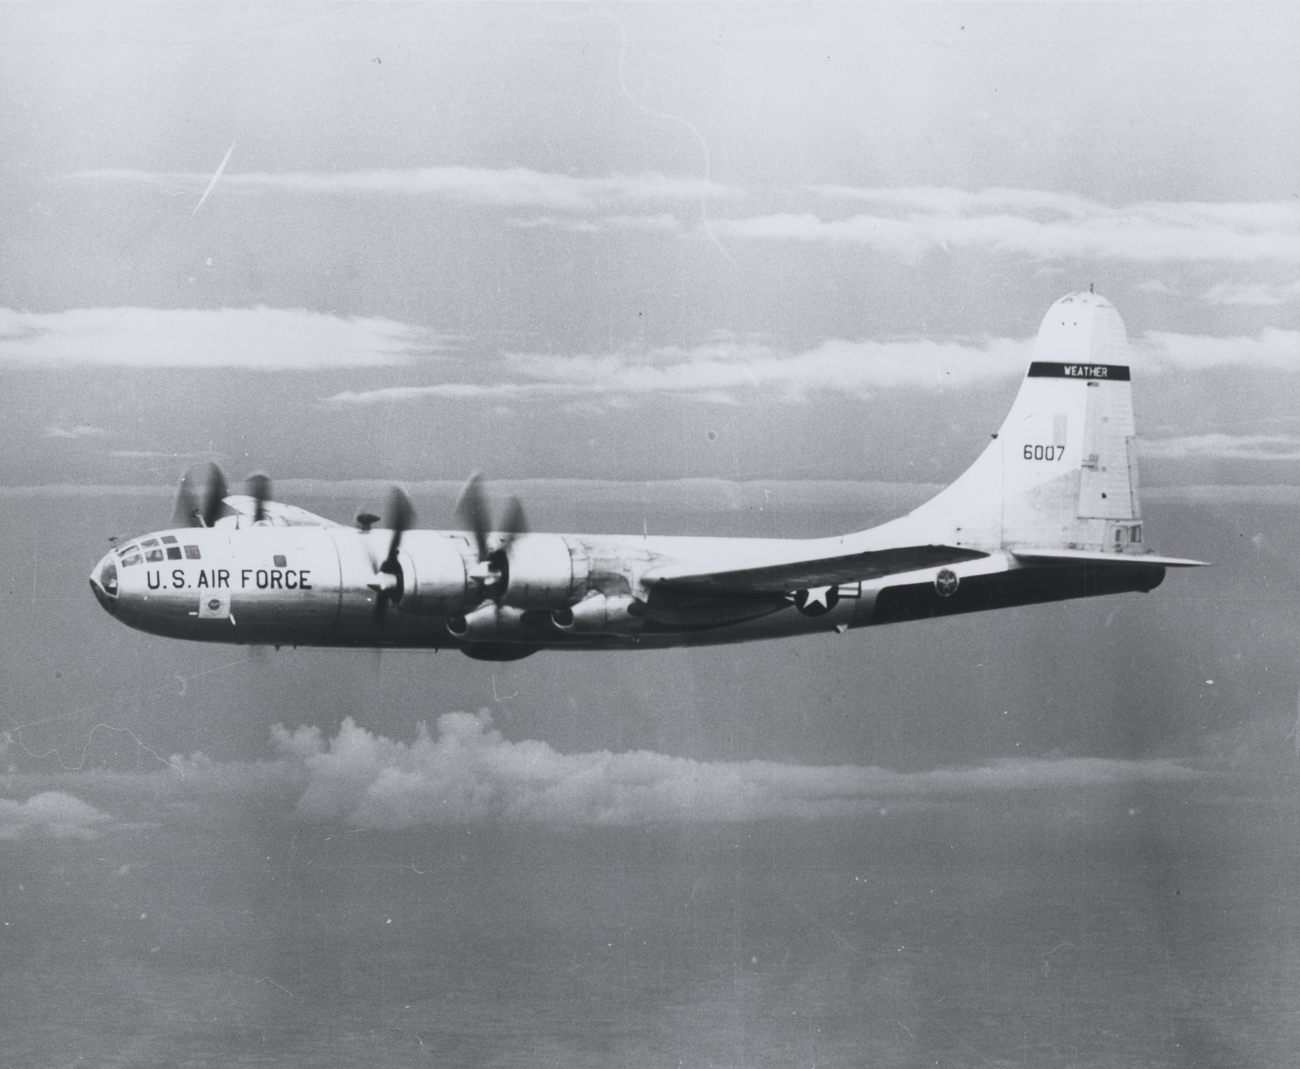 United States Air Force weather reconnaissance WB-50